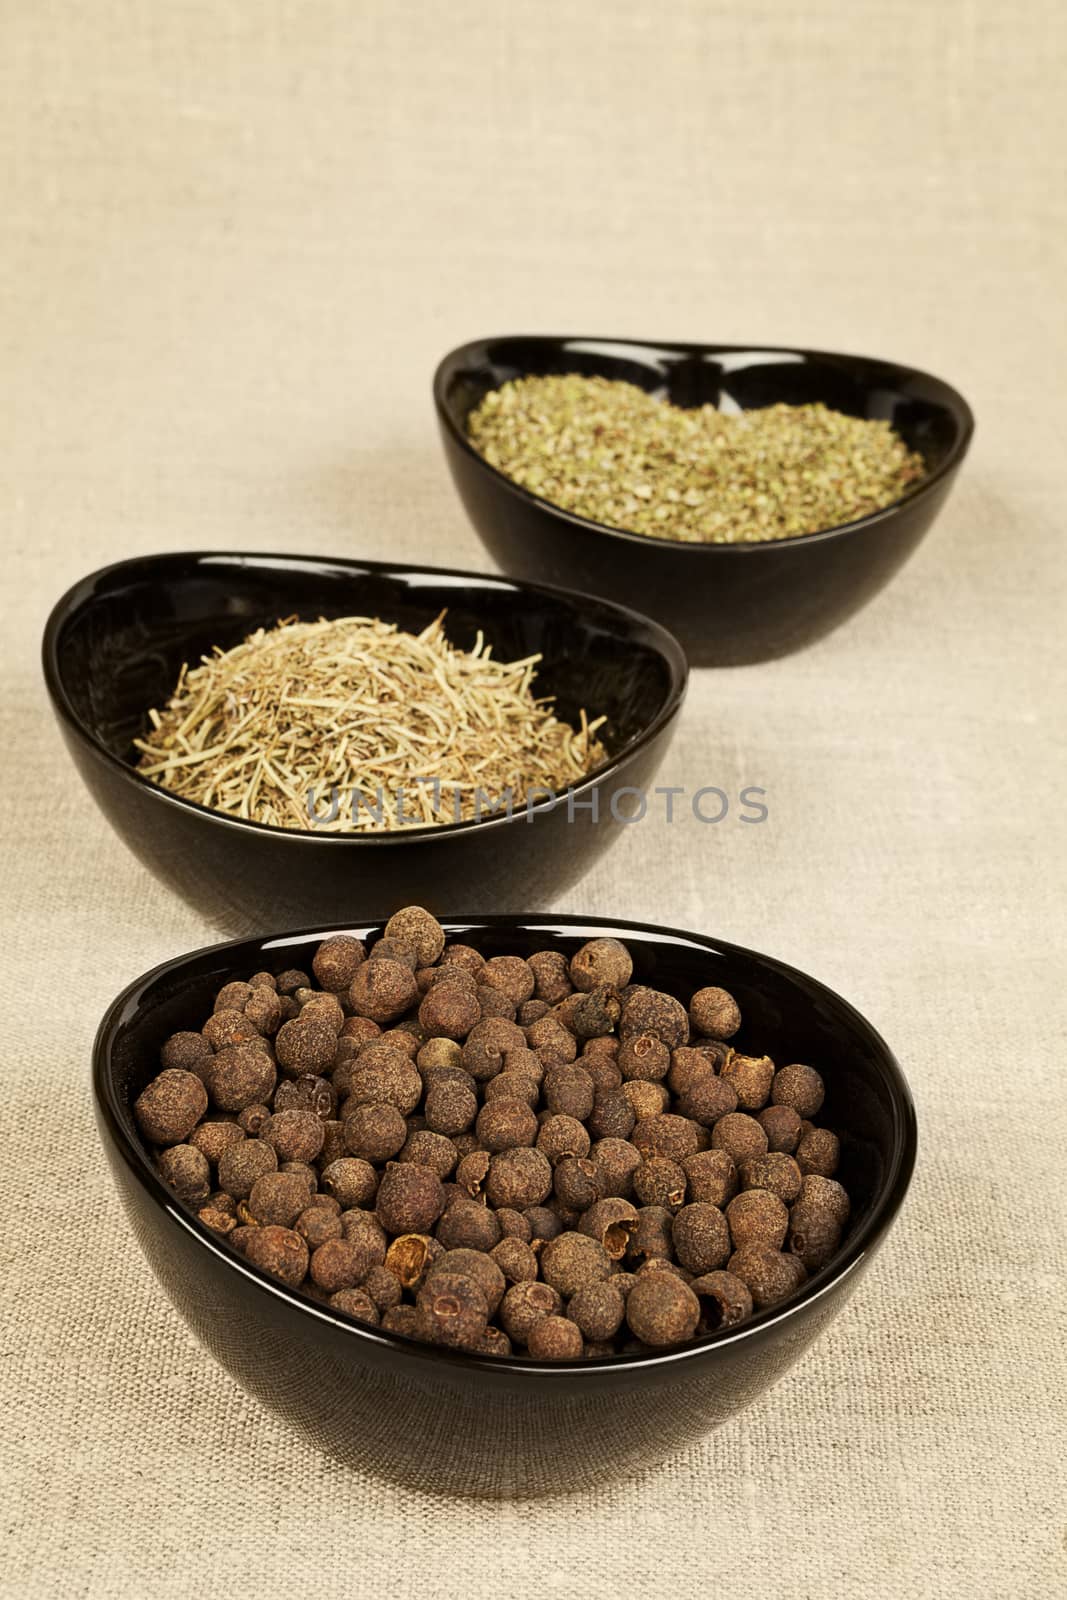 Spices collection in black bowls on brown background. Pepper corns, marjoram and rosemary.